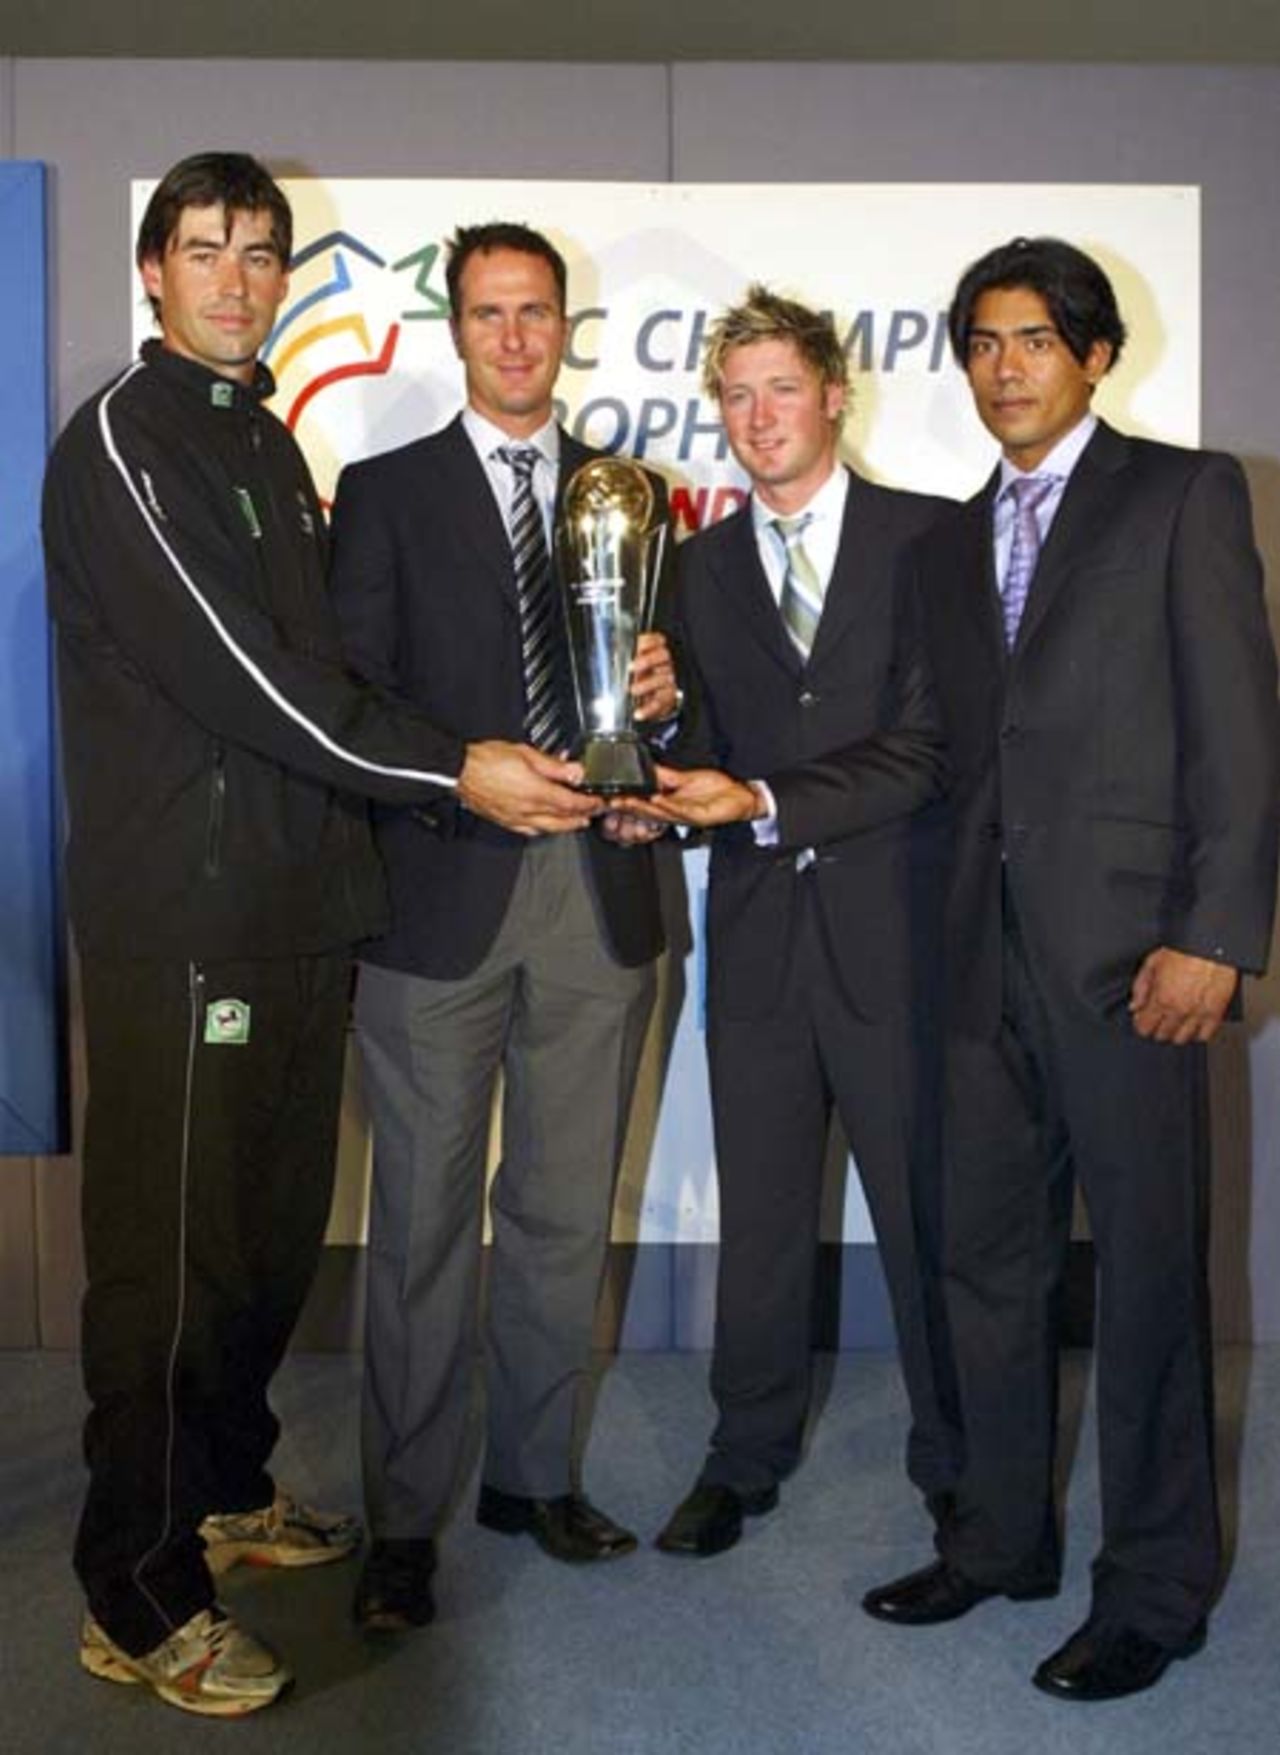 International cricketers Stephen Fleming, Michael Vaughan, Michael Clarke and Mohammad Sami launch the ICC Champions Trophy 2004